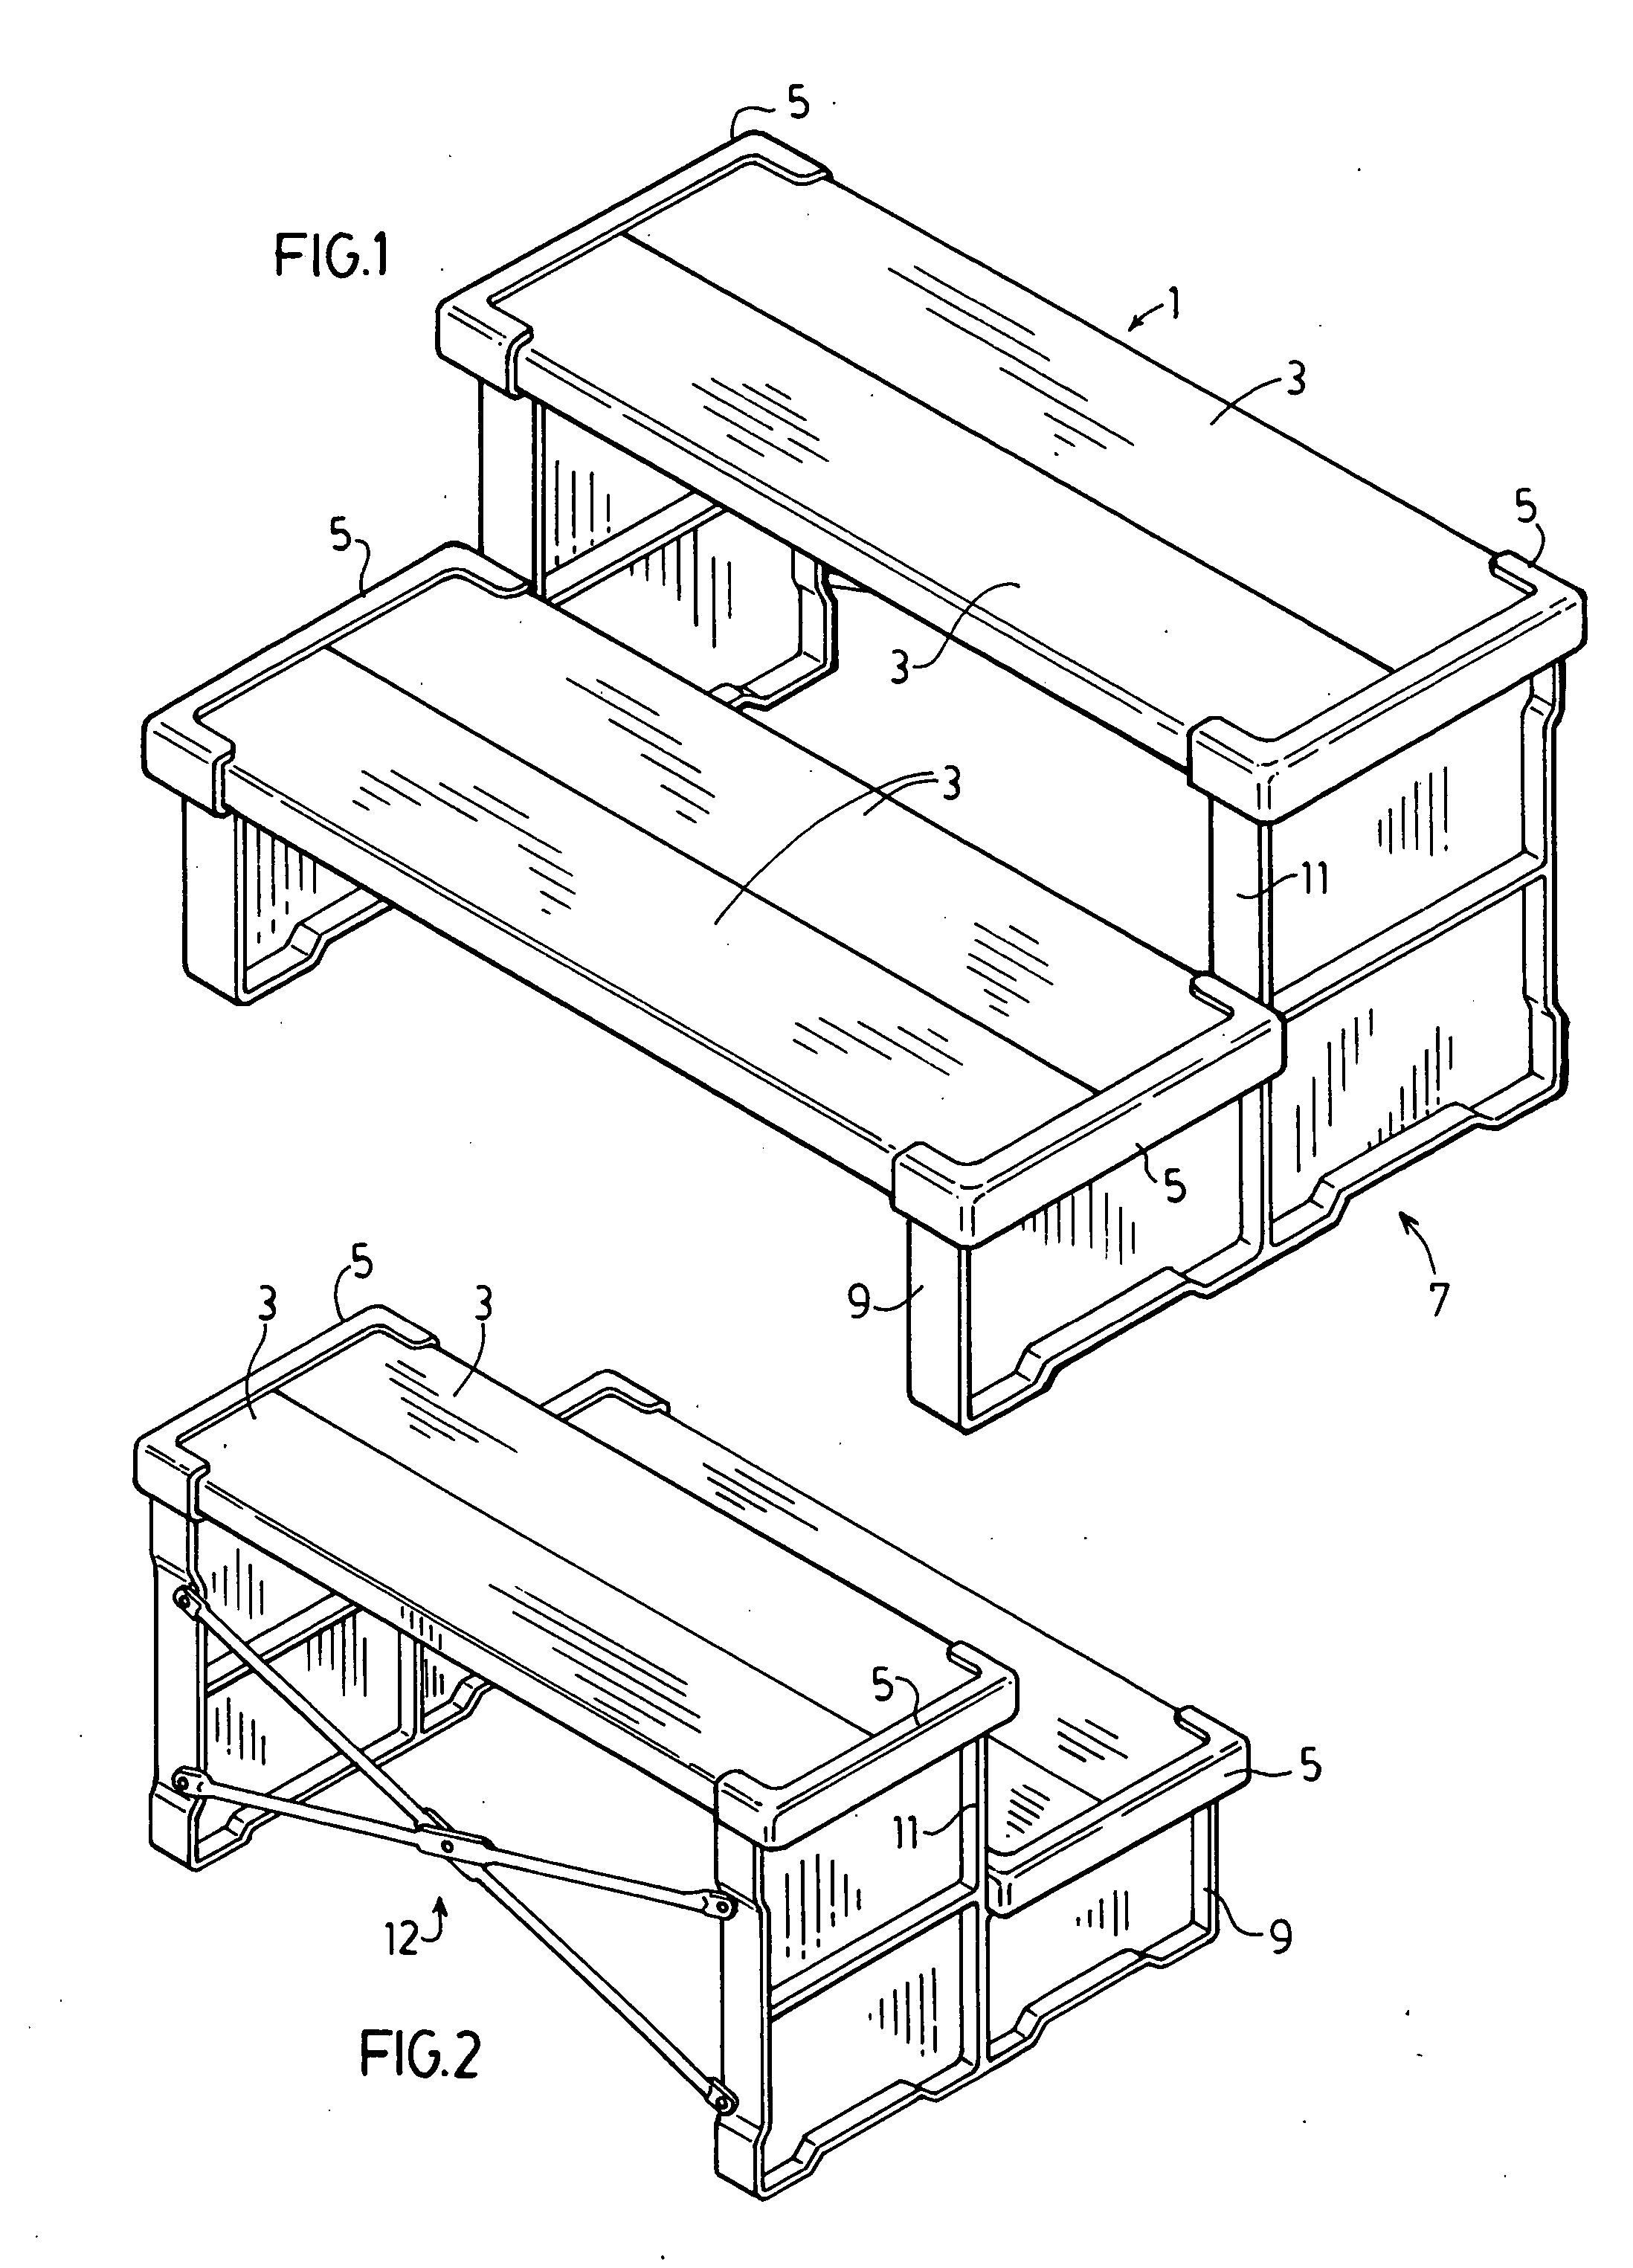 Board mounting to support system